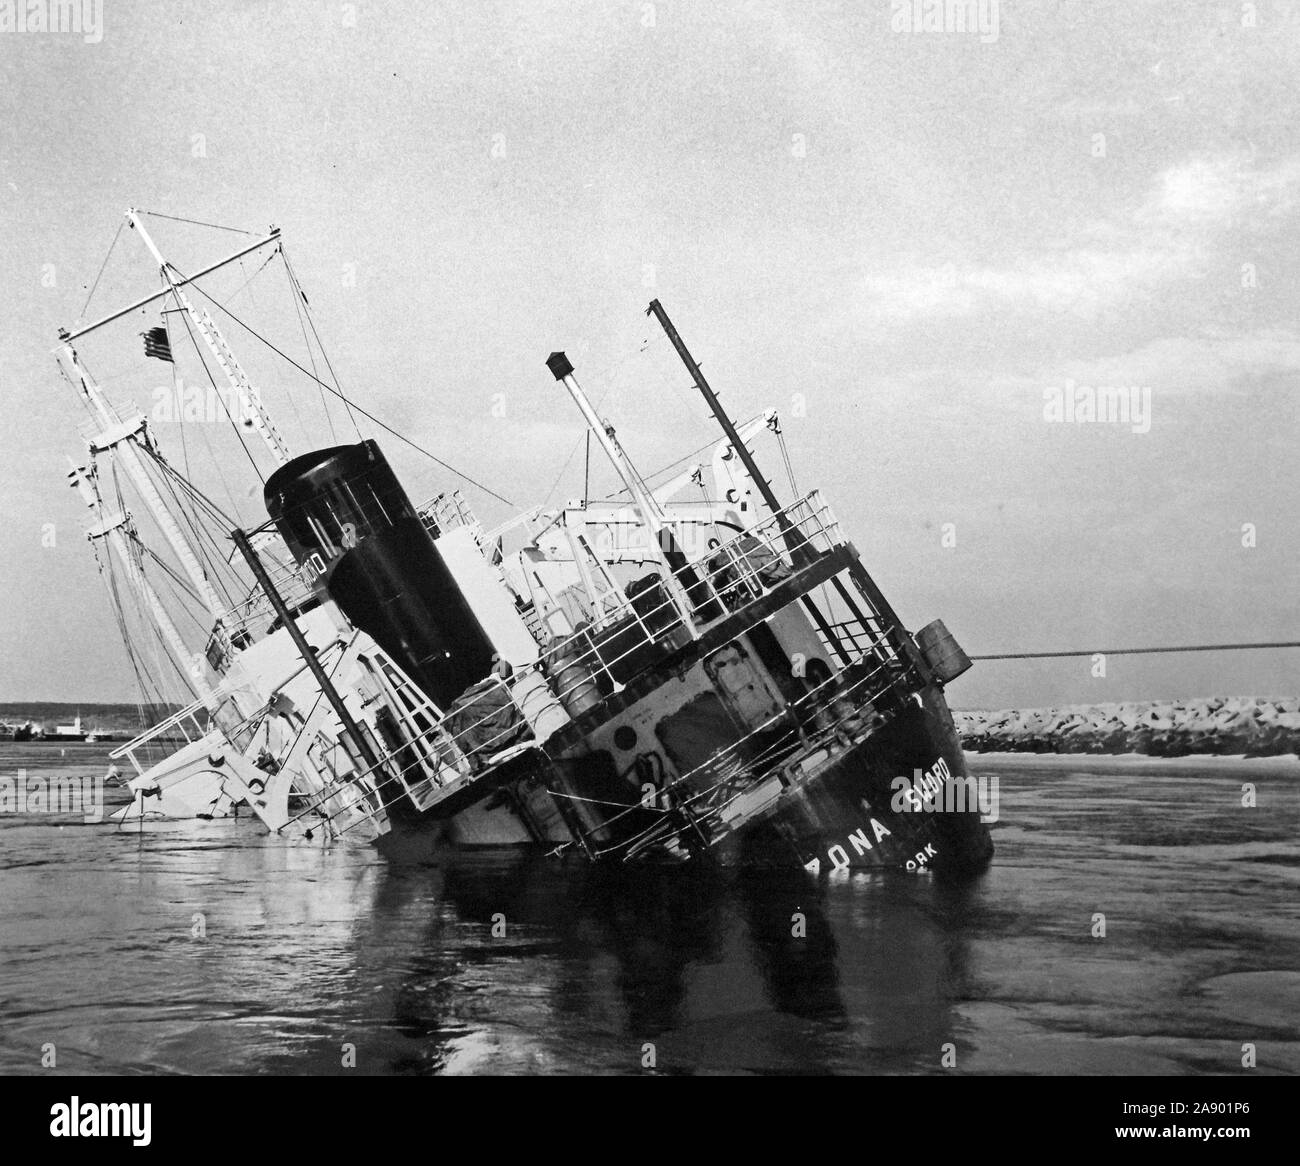 This photograph depicts the cargo ship Arizona Sword listing to port as it sinks in the Cape Cod Canal. On May 5, 1951, the vessel was involved in a collision with the SS Berwindvale near the east end of the canal in Sandwich, Massachusetts. Her cargo of 48,000 tons of sulphur would be successfully salvaged by midsummer. Stock Photo